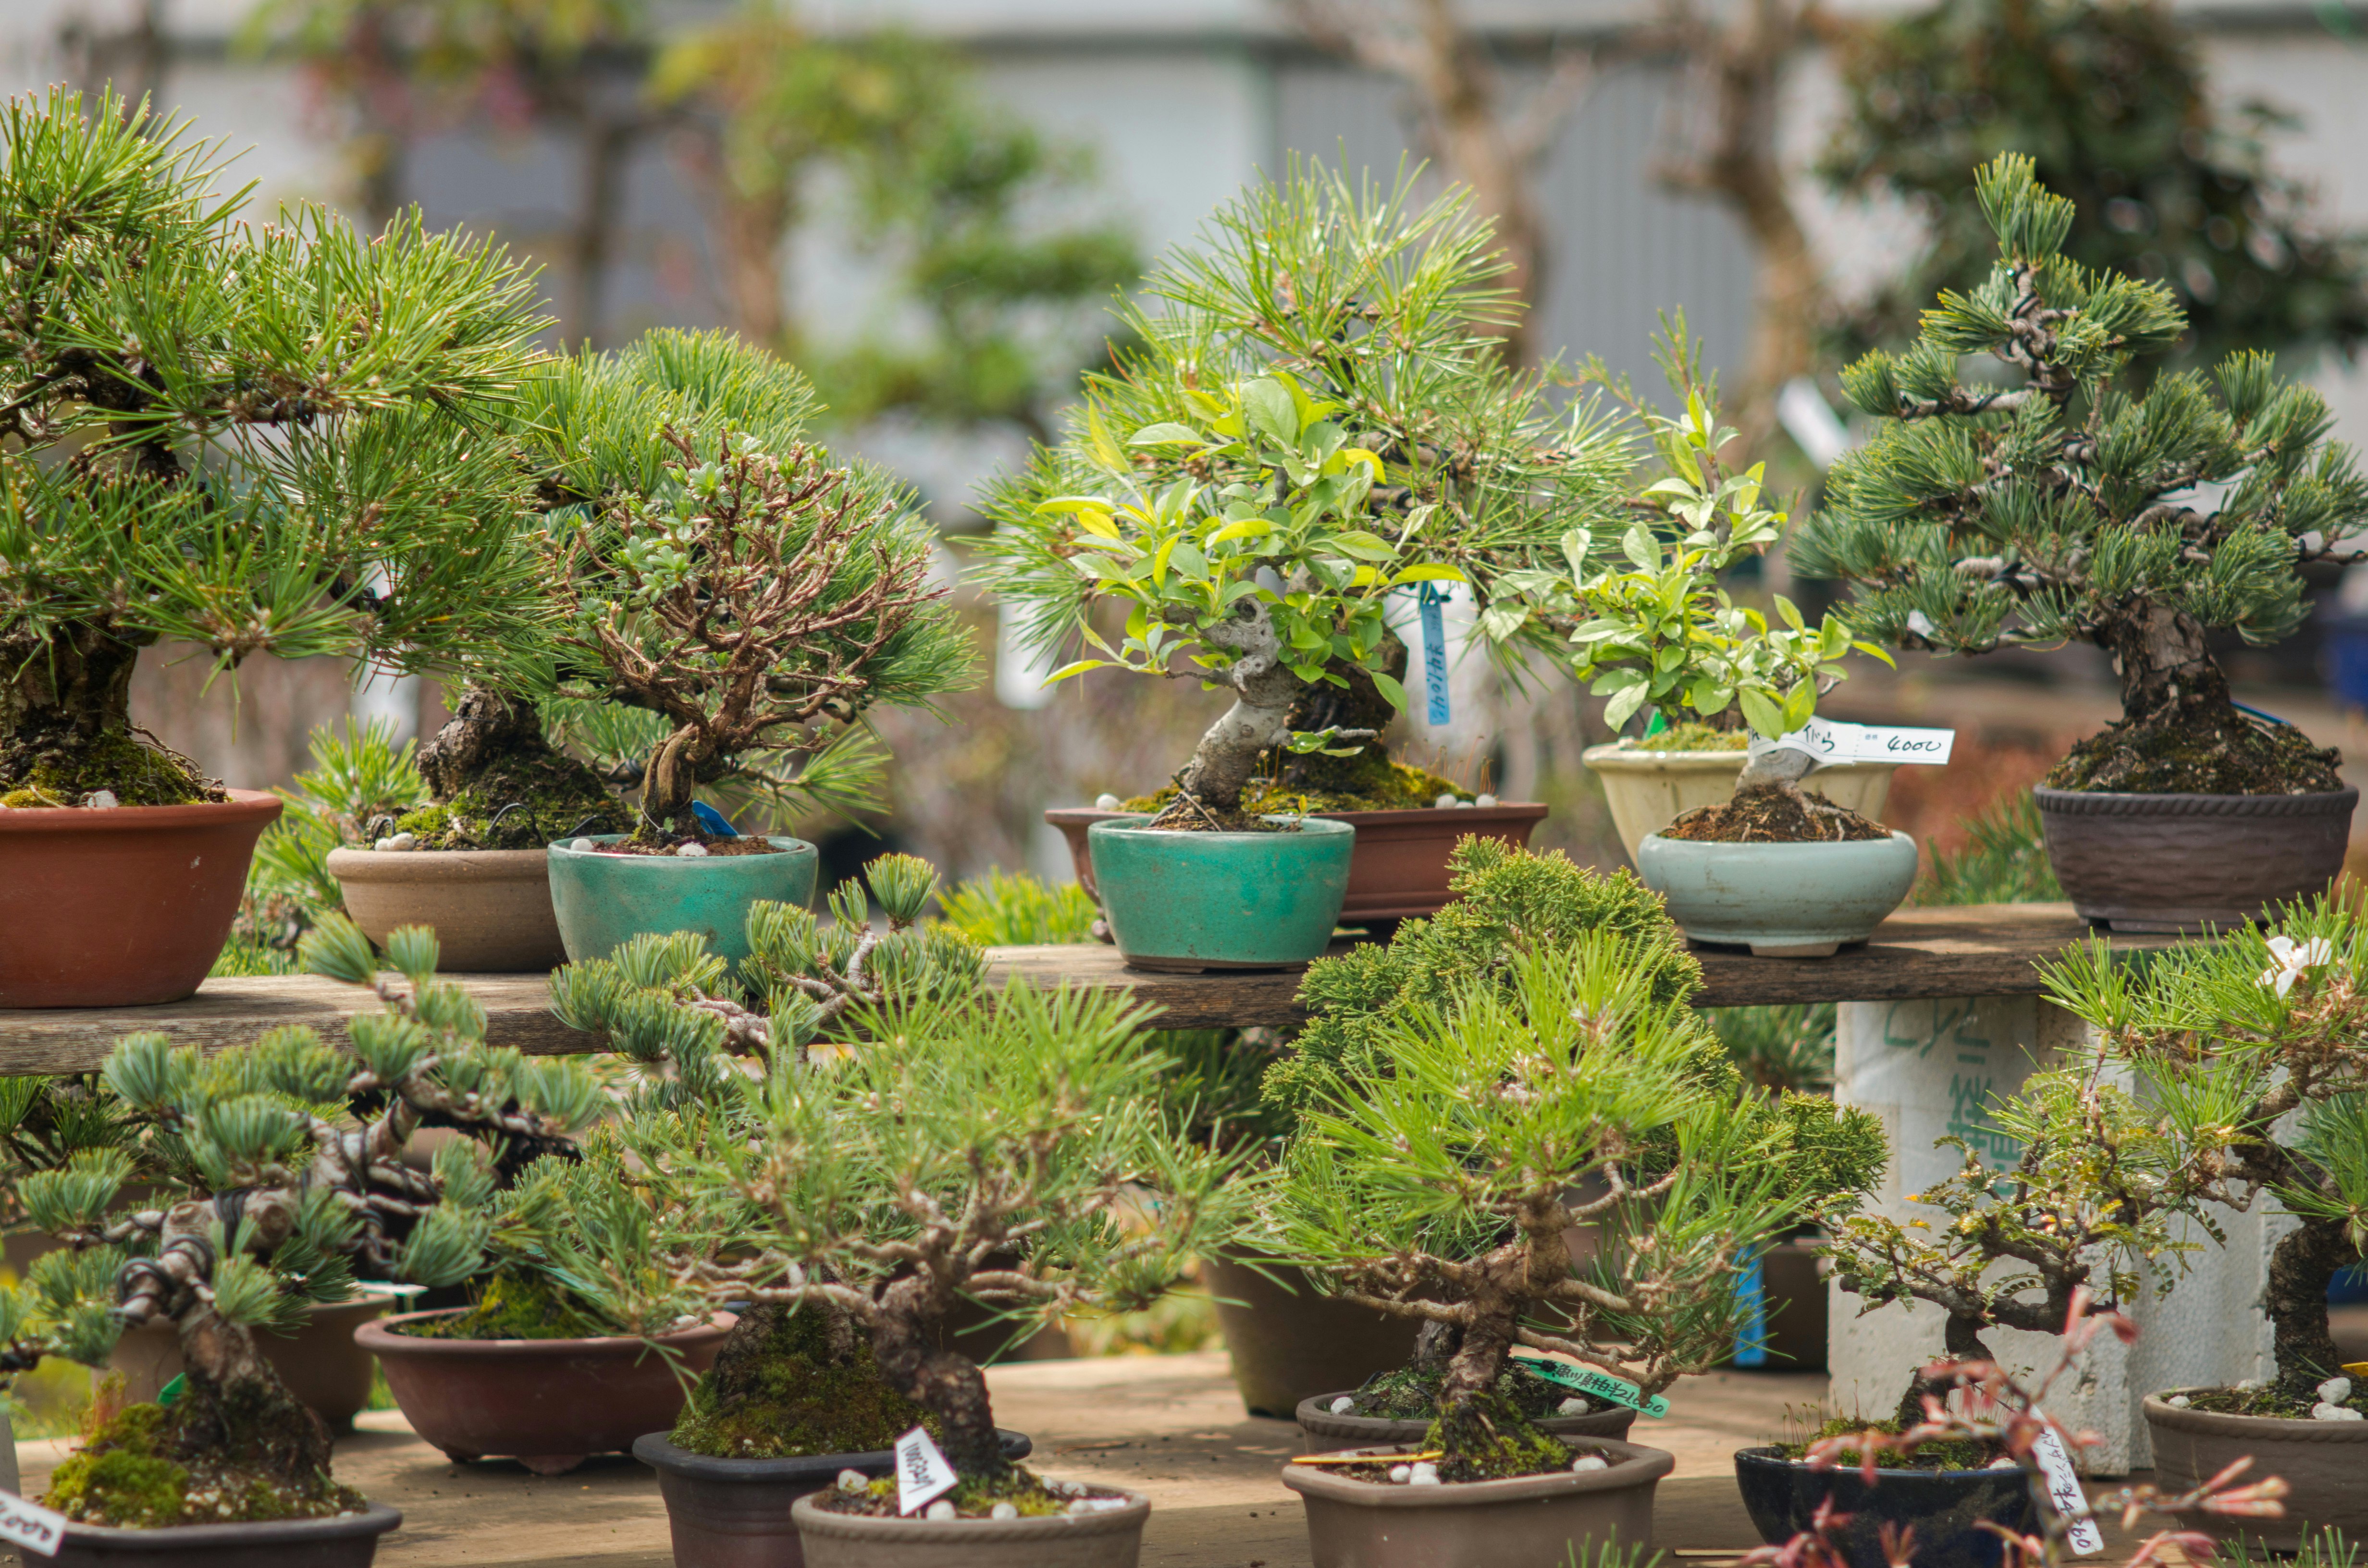 A display of potted bonsai trees of different sizes and varieties.